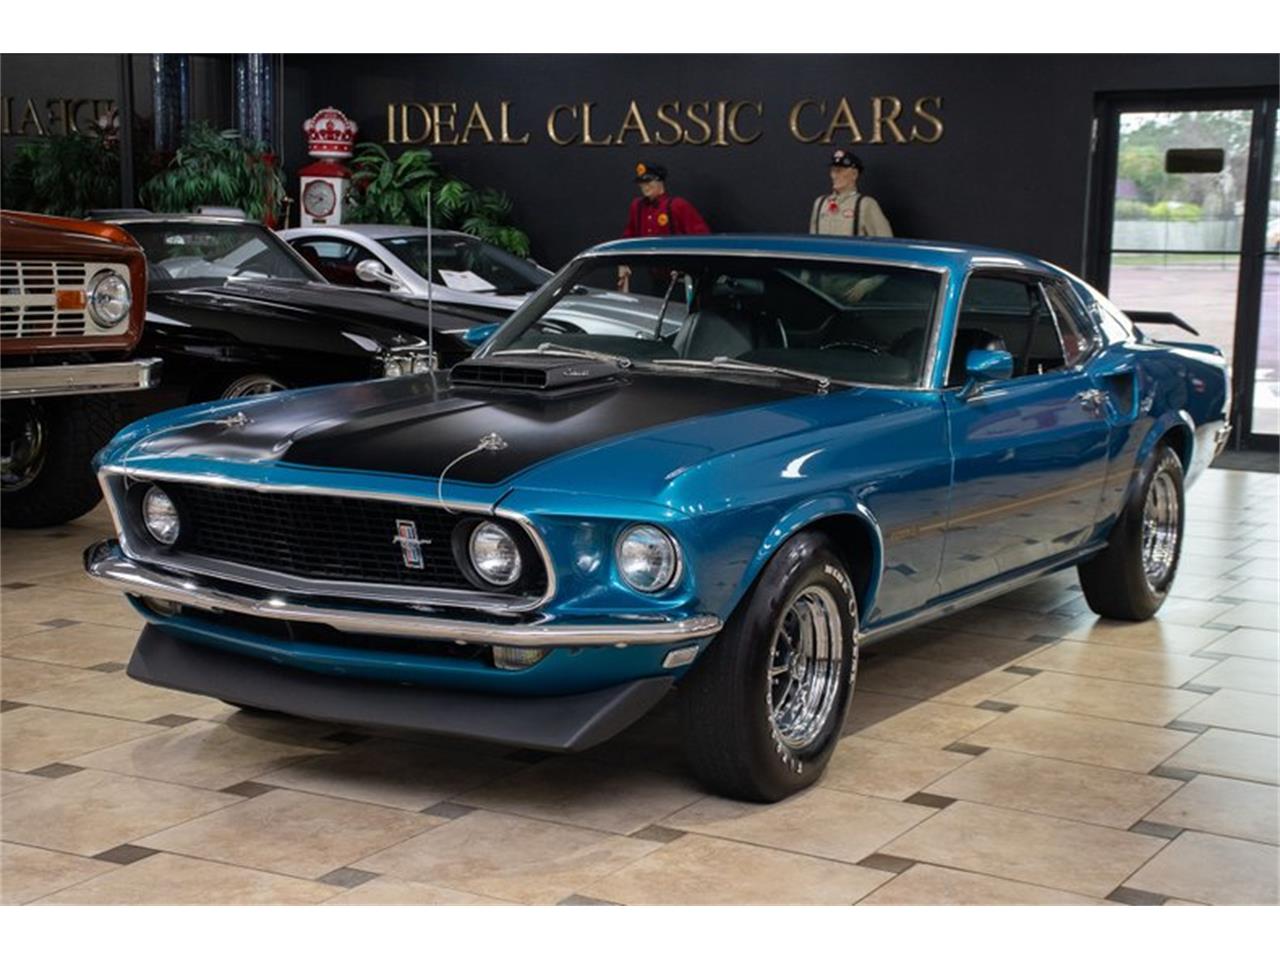 For Sale: 1969 Ford Mustang in Venice, Florida for sale in Venice, FL